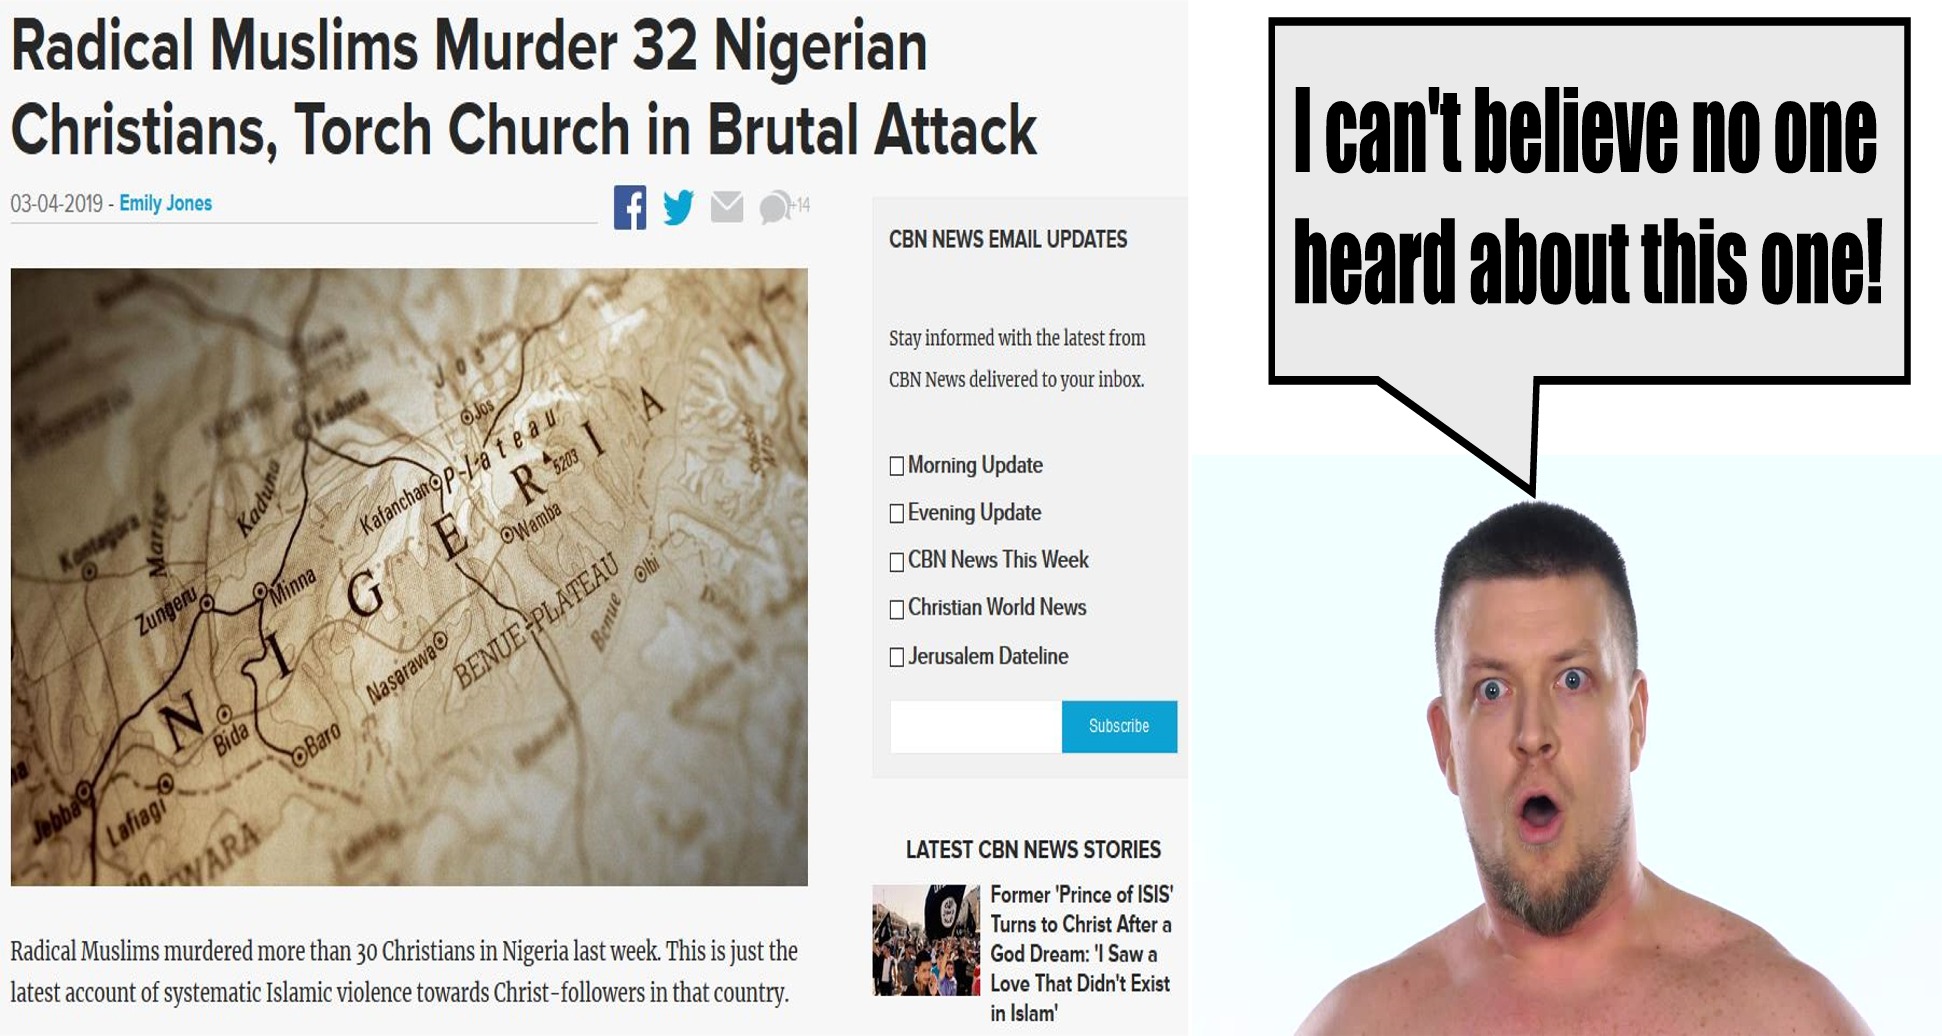 jaw - Radical Muslims Murder 32 Nigerian Christians, Torch Church in Brutal Attack 03042019 Emily Jones I can't believe no one heard about this one! Cbn News Email Updates Stay informed with the latest from Cbn News delivered to your inbox. O Jos Morning 